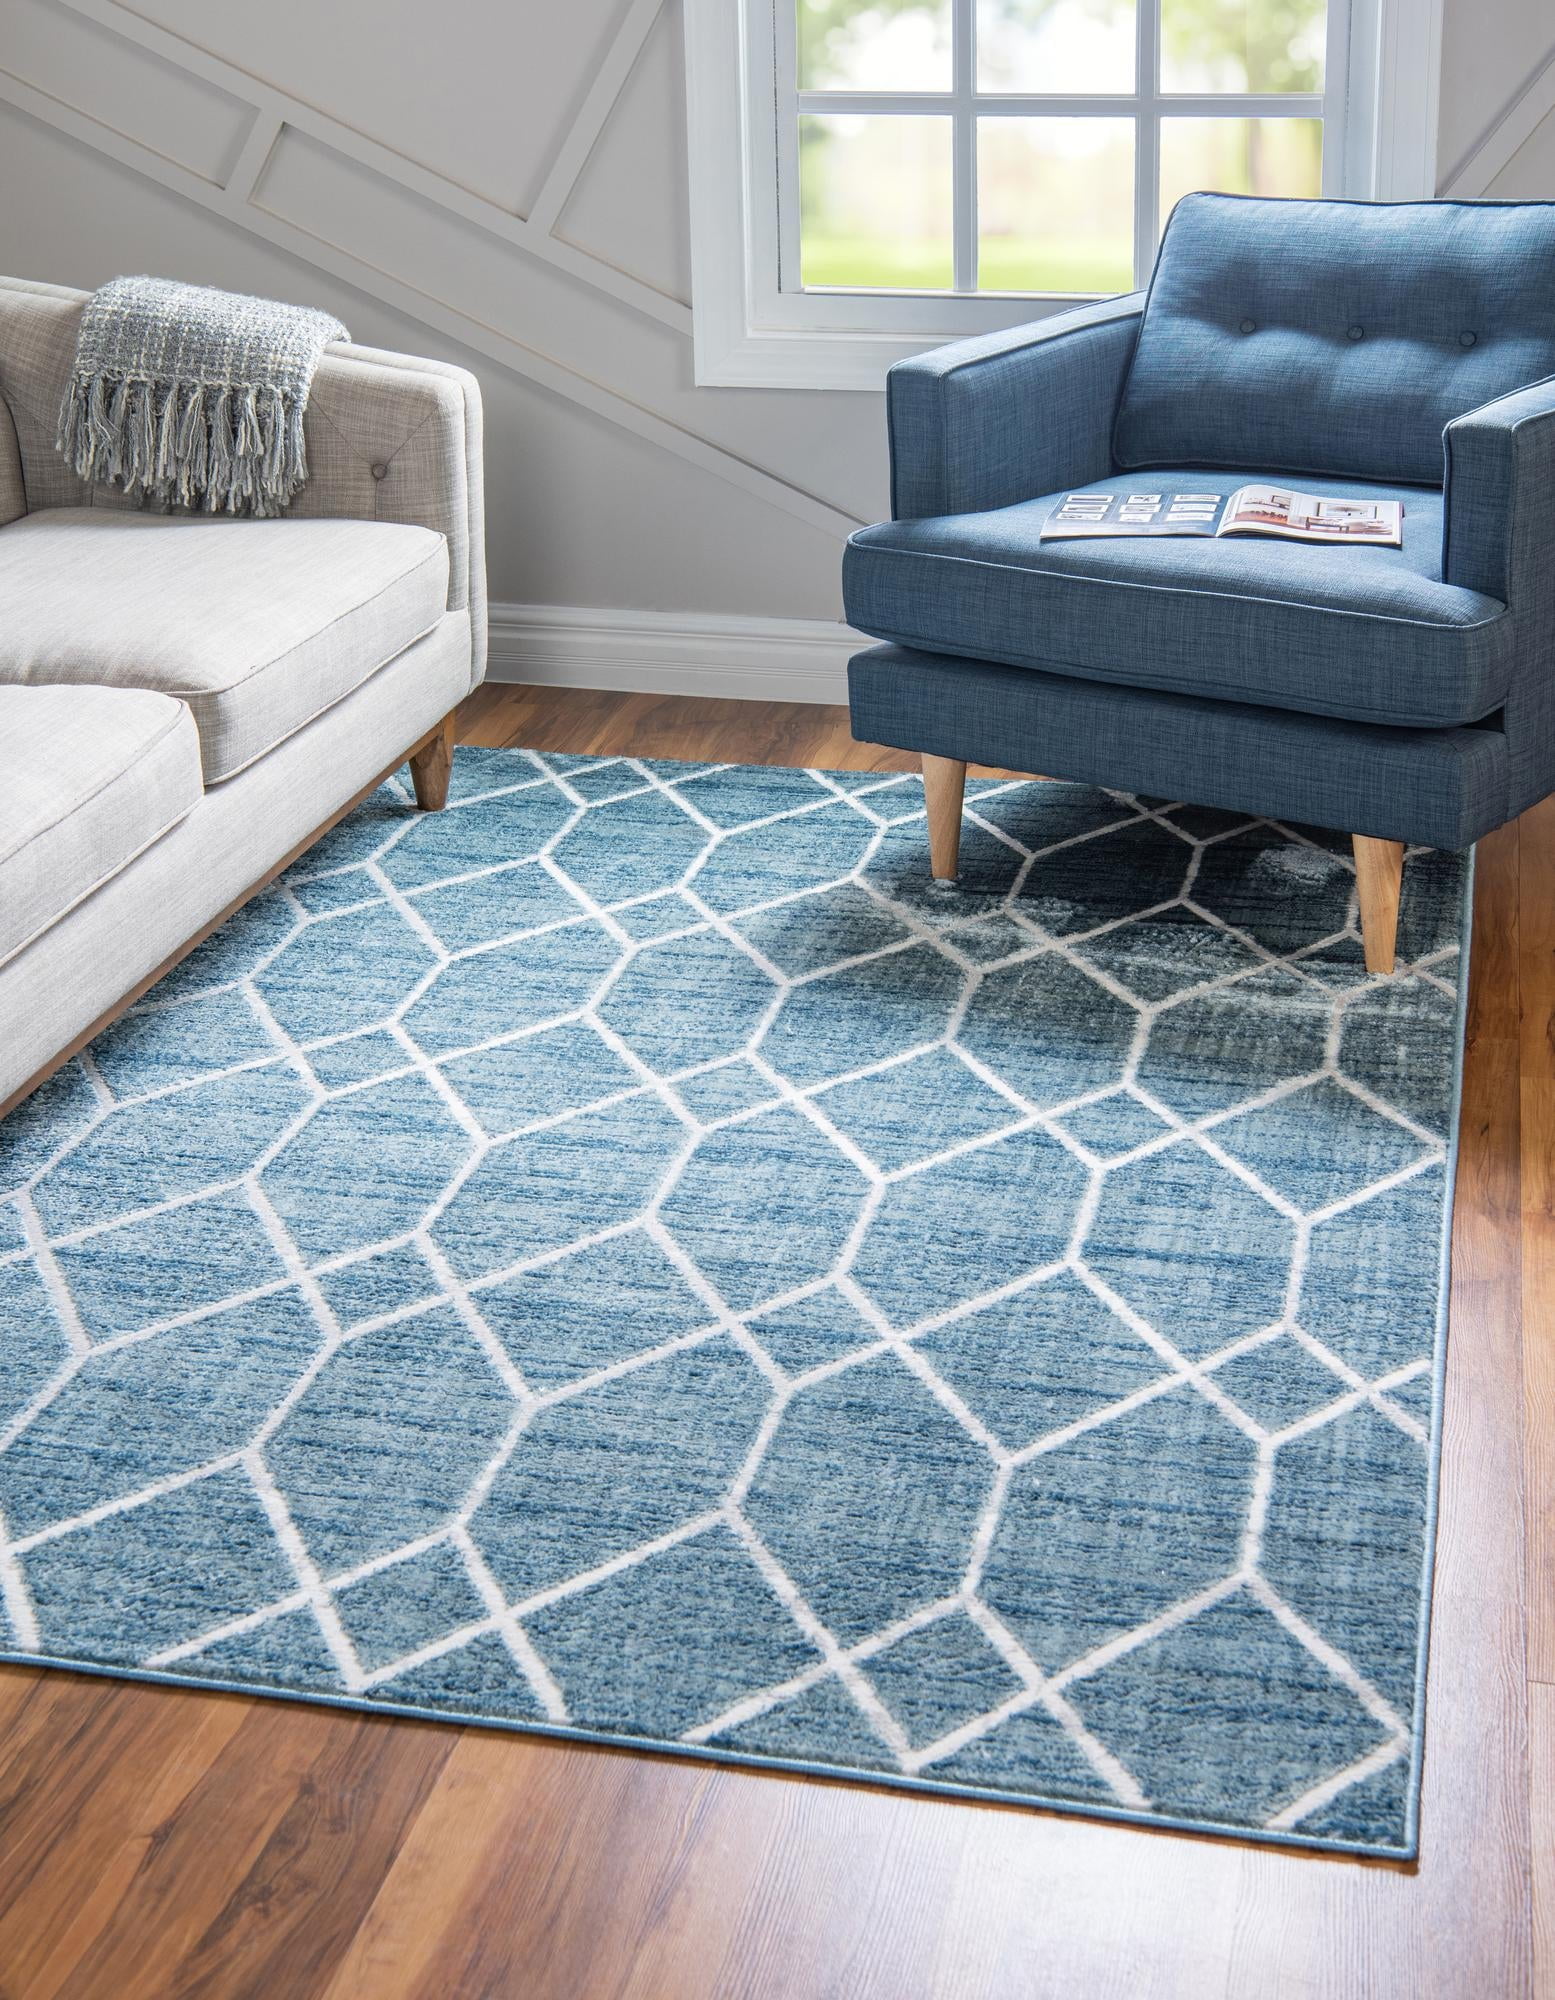 7' x 10' Gray Low-Pile Rug Perfect for Living Rooms Large Dining Rooms Open Floorplans Rugs.com Lattice Trellis Collection Rug